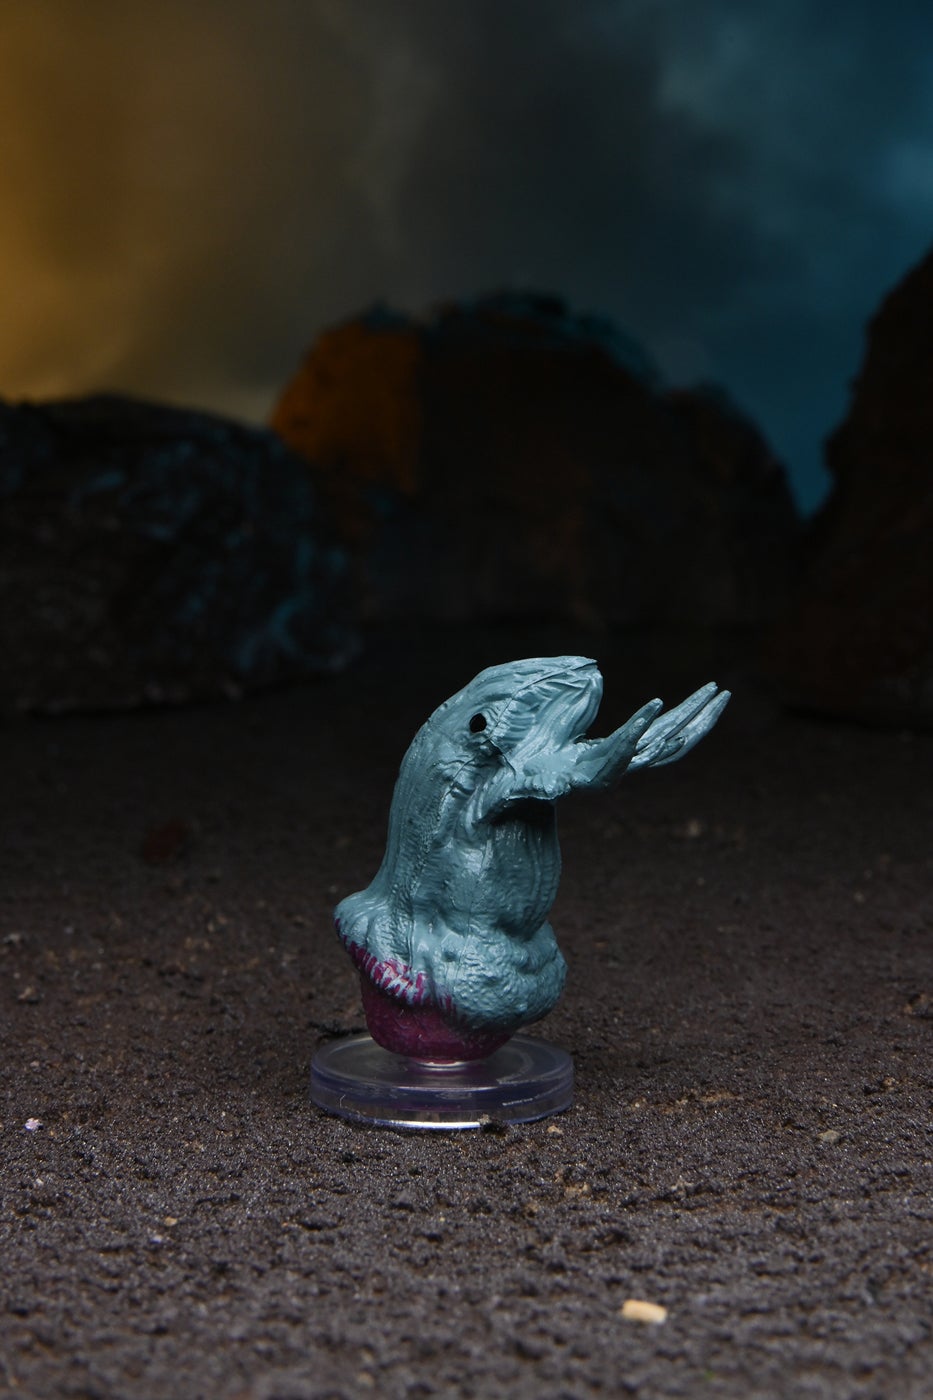 Mini figure of a Bantrid with a orb-like base for movement with large hand-like appendages growing from their upper torso